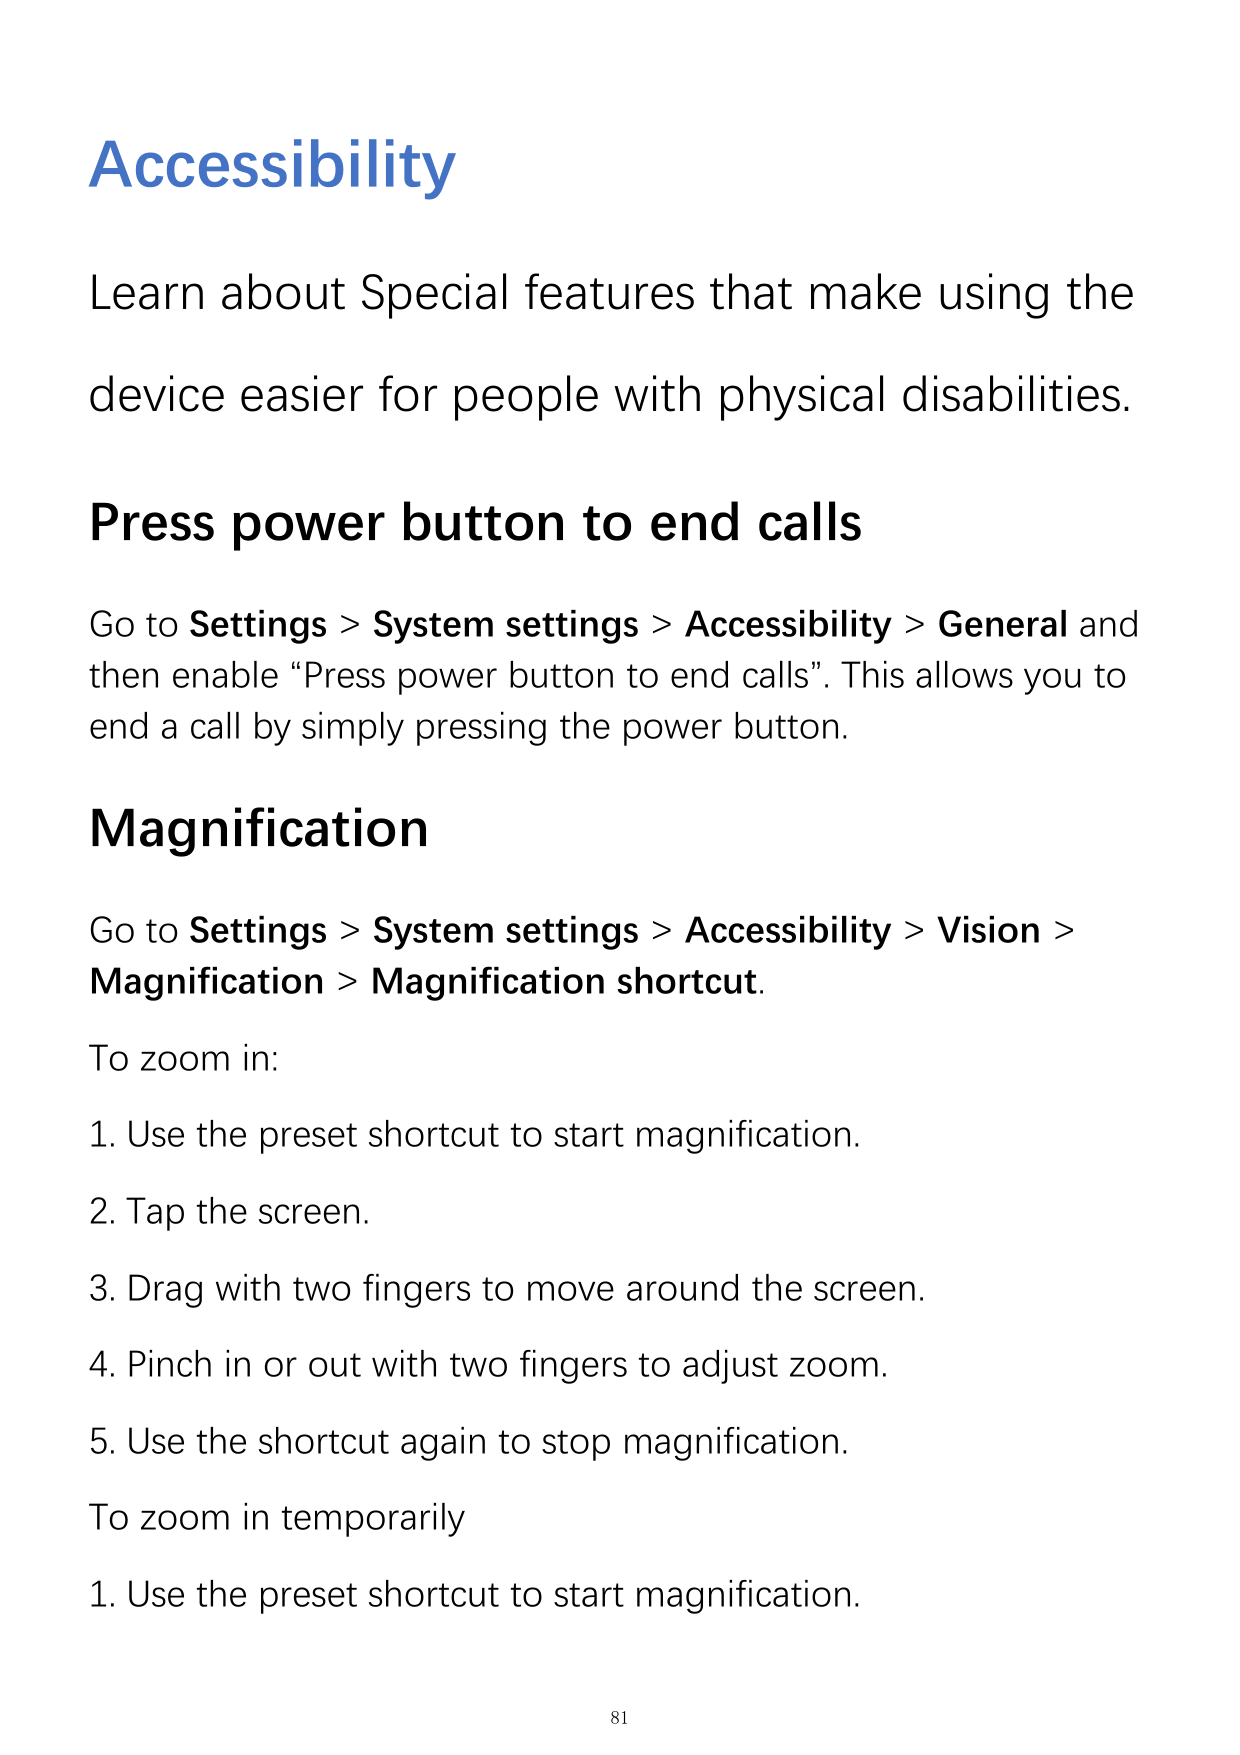 AccessibilityLearn about Special features that make using thedevice easier for people with physical disabilities.Press power but